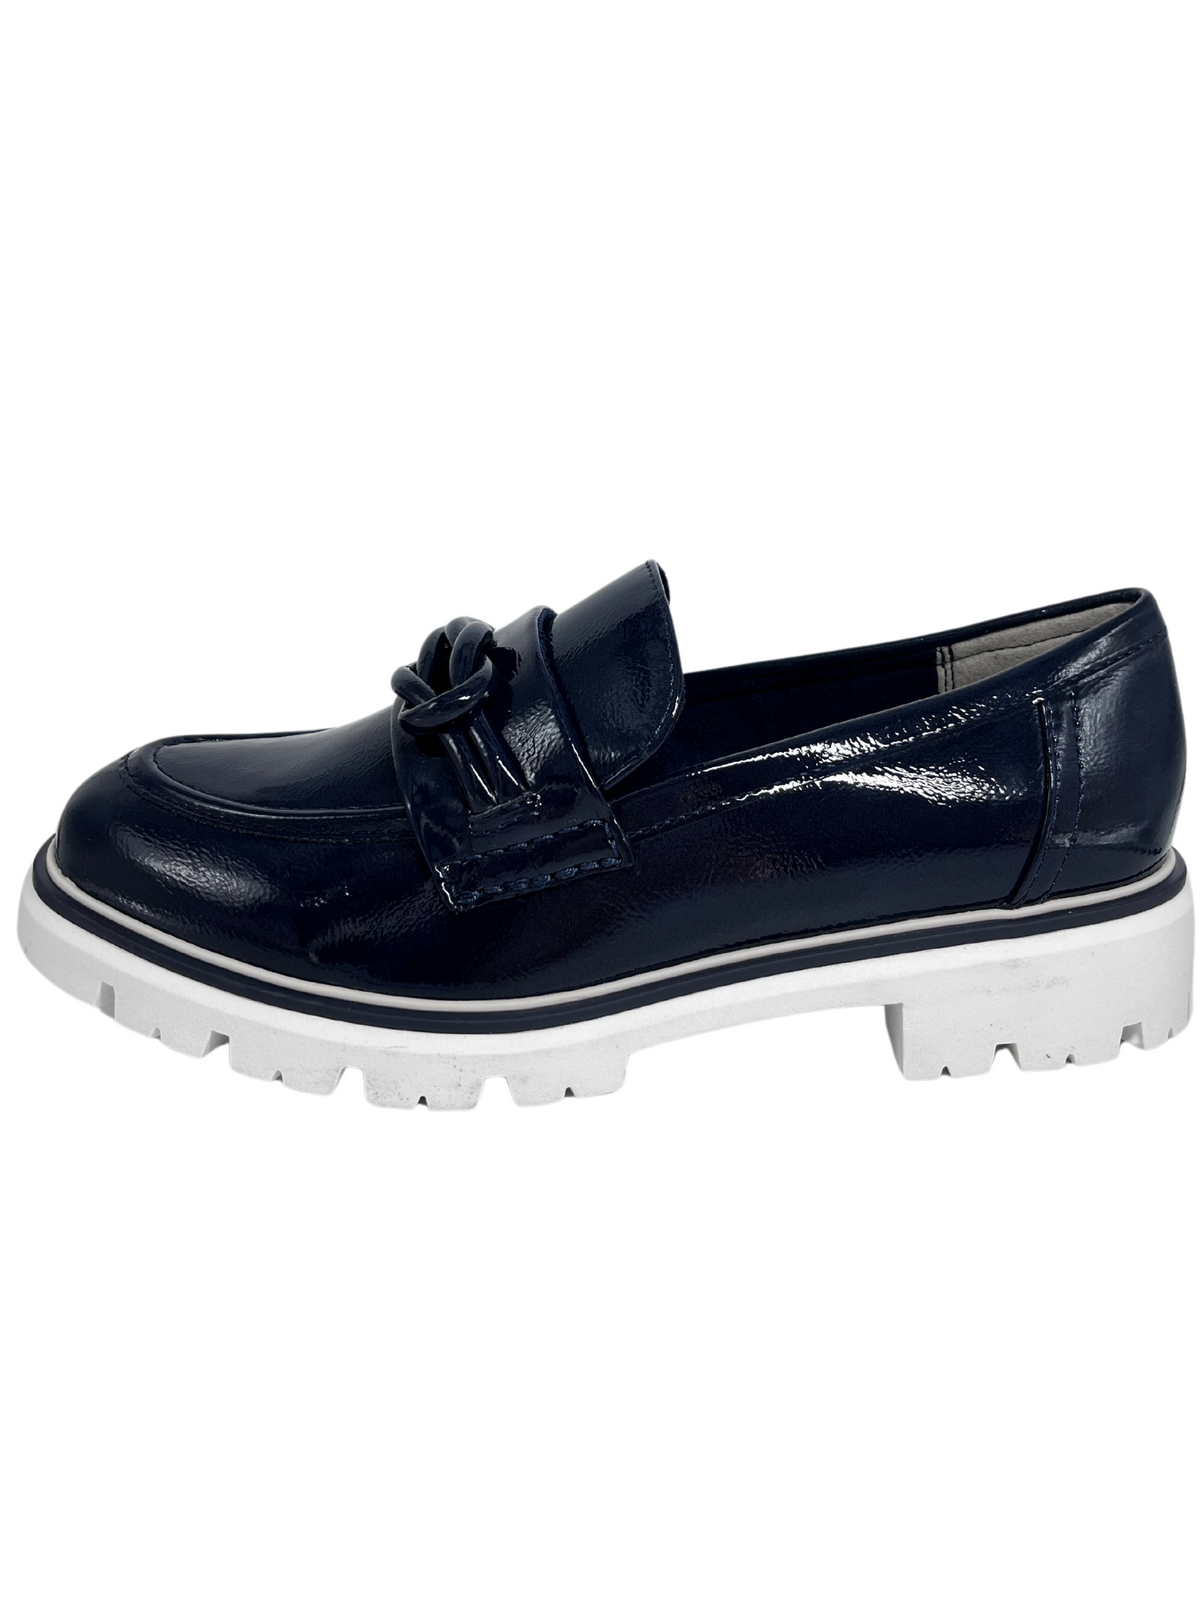 Marco Tozzi Navy Patent Loafer With Knot Design